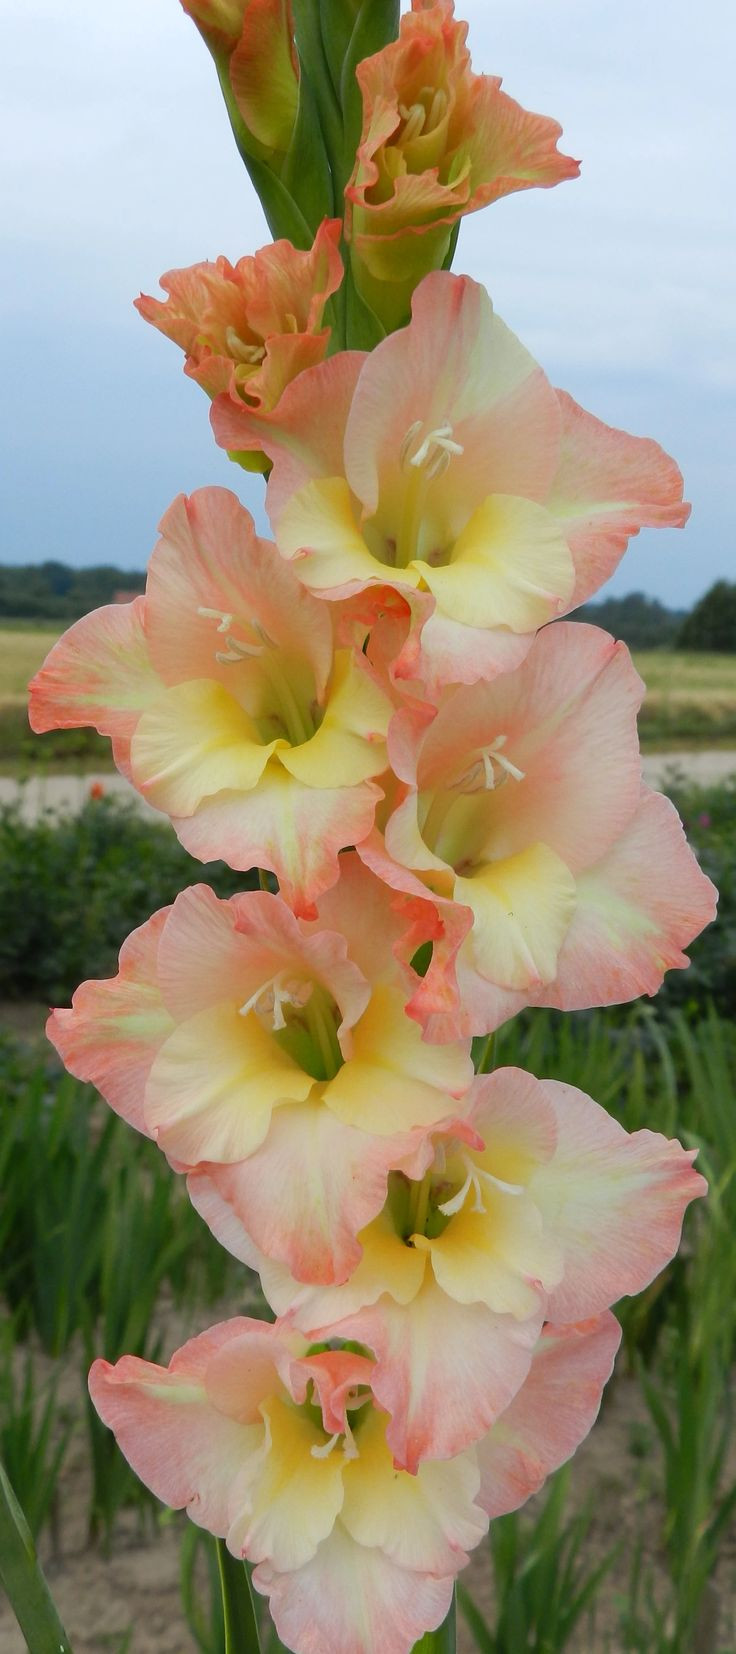 25 Trendy Gladiolus Vase for Sale 2022 free download gladiolus vase for sale of 6306 best flowers images on pinterest beautiful flowers pretty with baby love 143